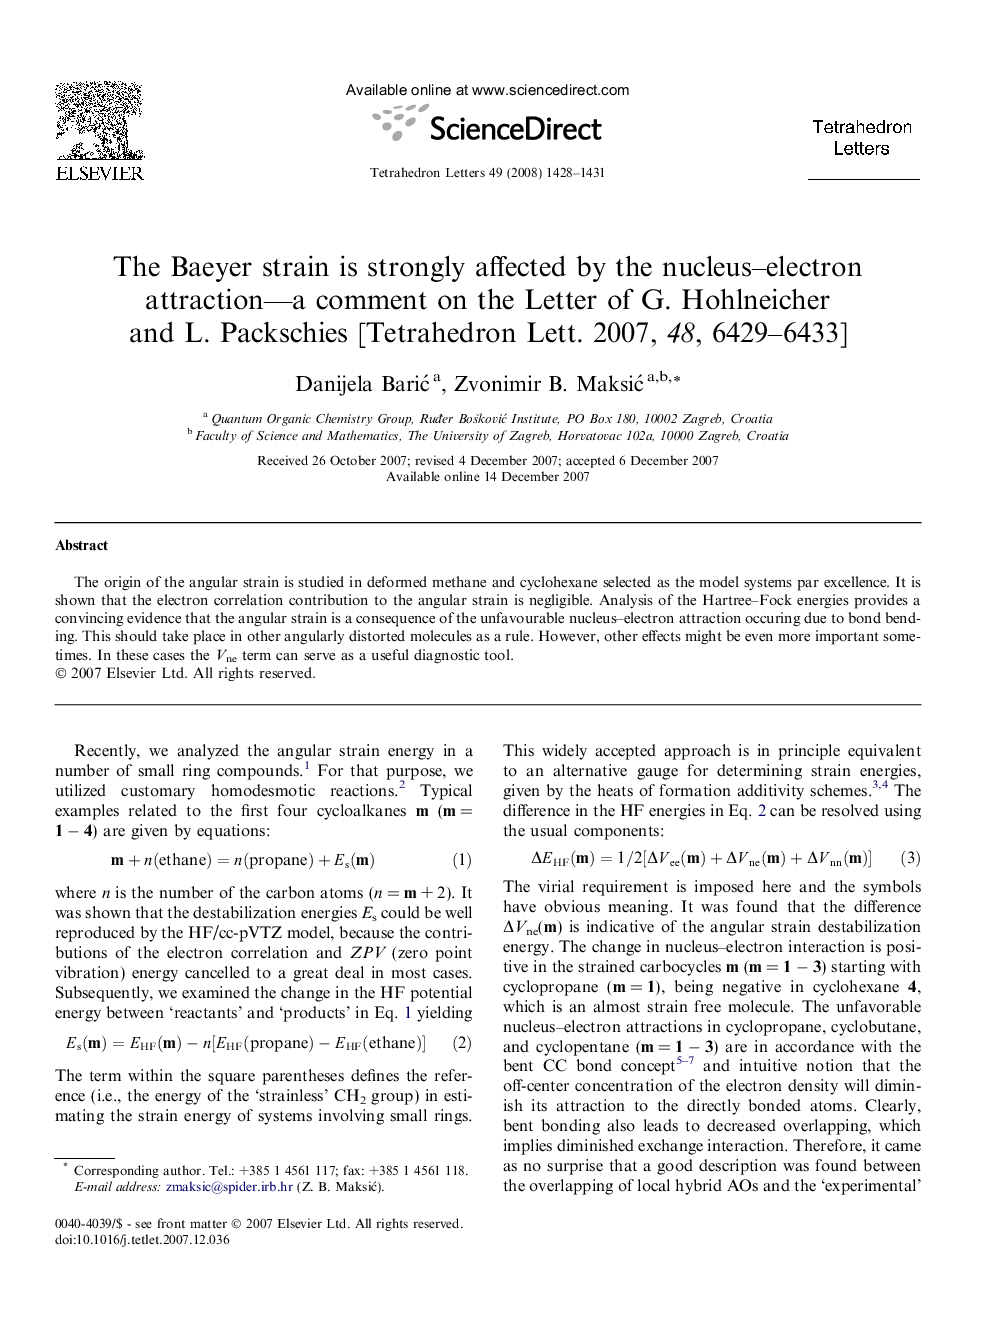 The Baeyer strain is strongly affected by the nucleus-electron attraction-a comment on the Letter of G. Hohlneicher and L. Packschies [Tetrahedron Lett. 2007, 48, 6429-6433]